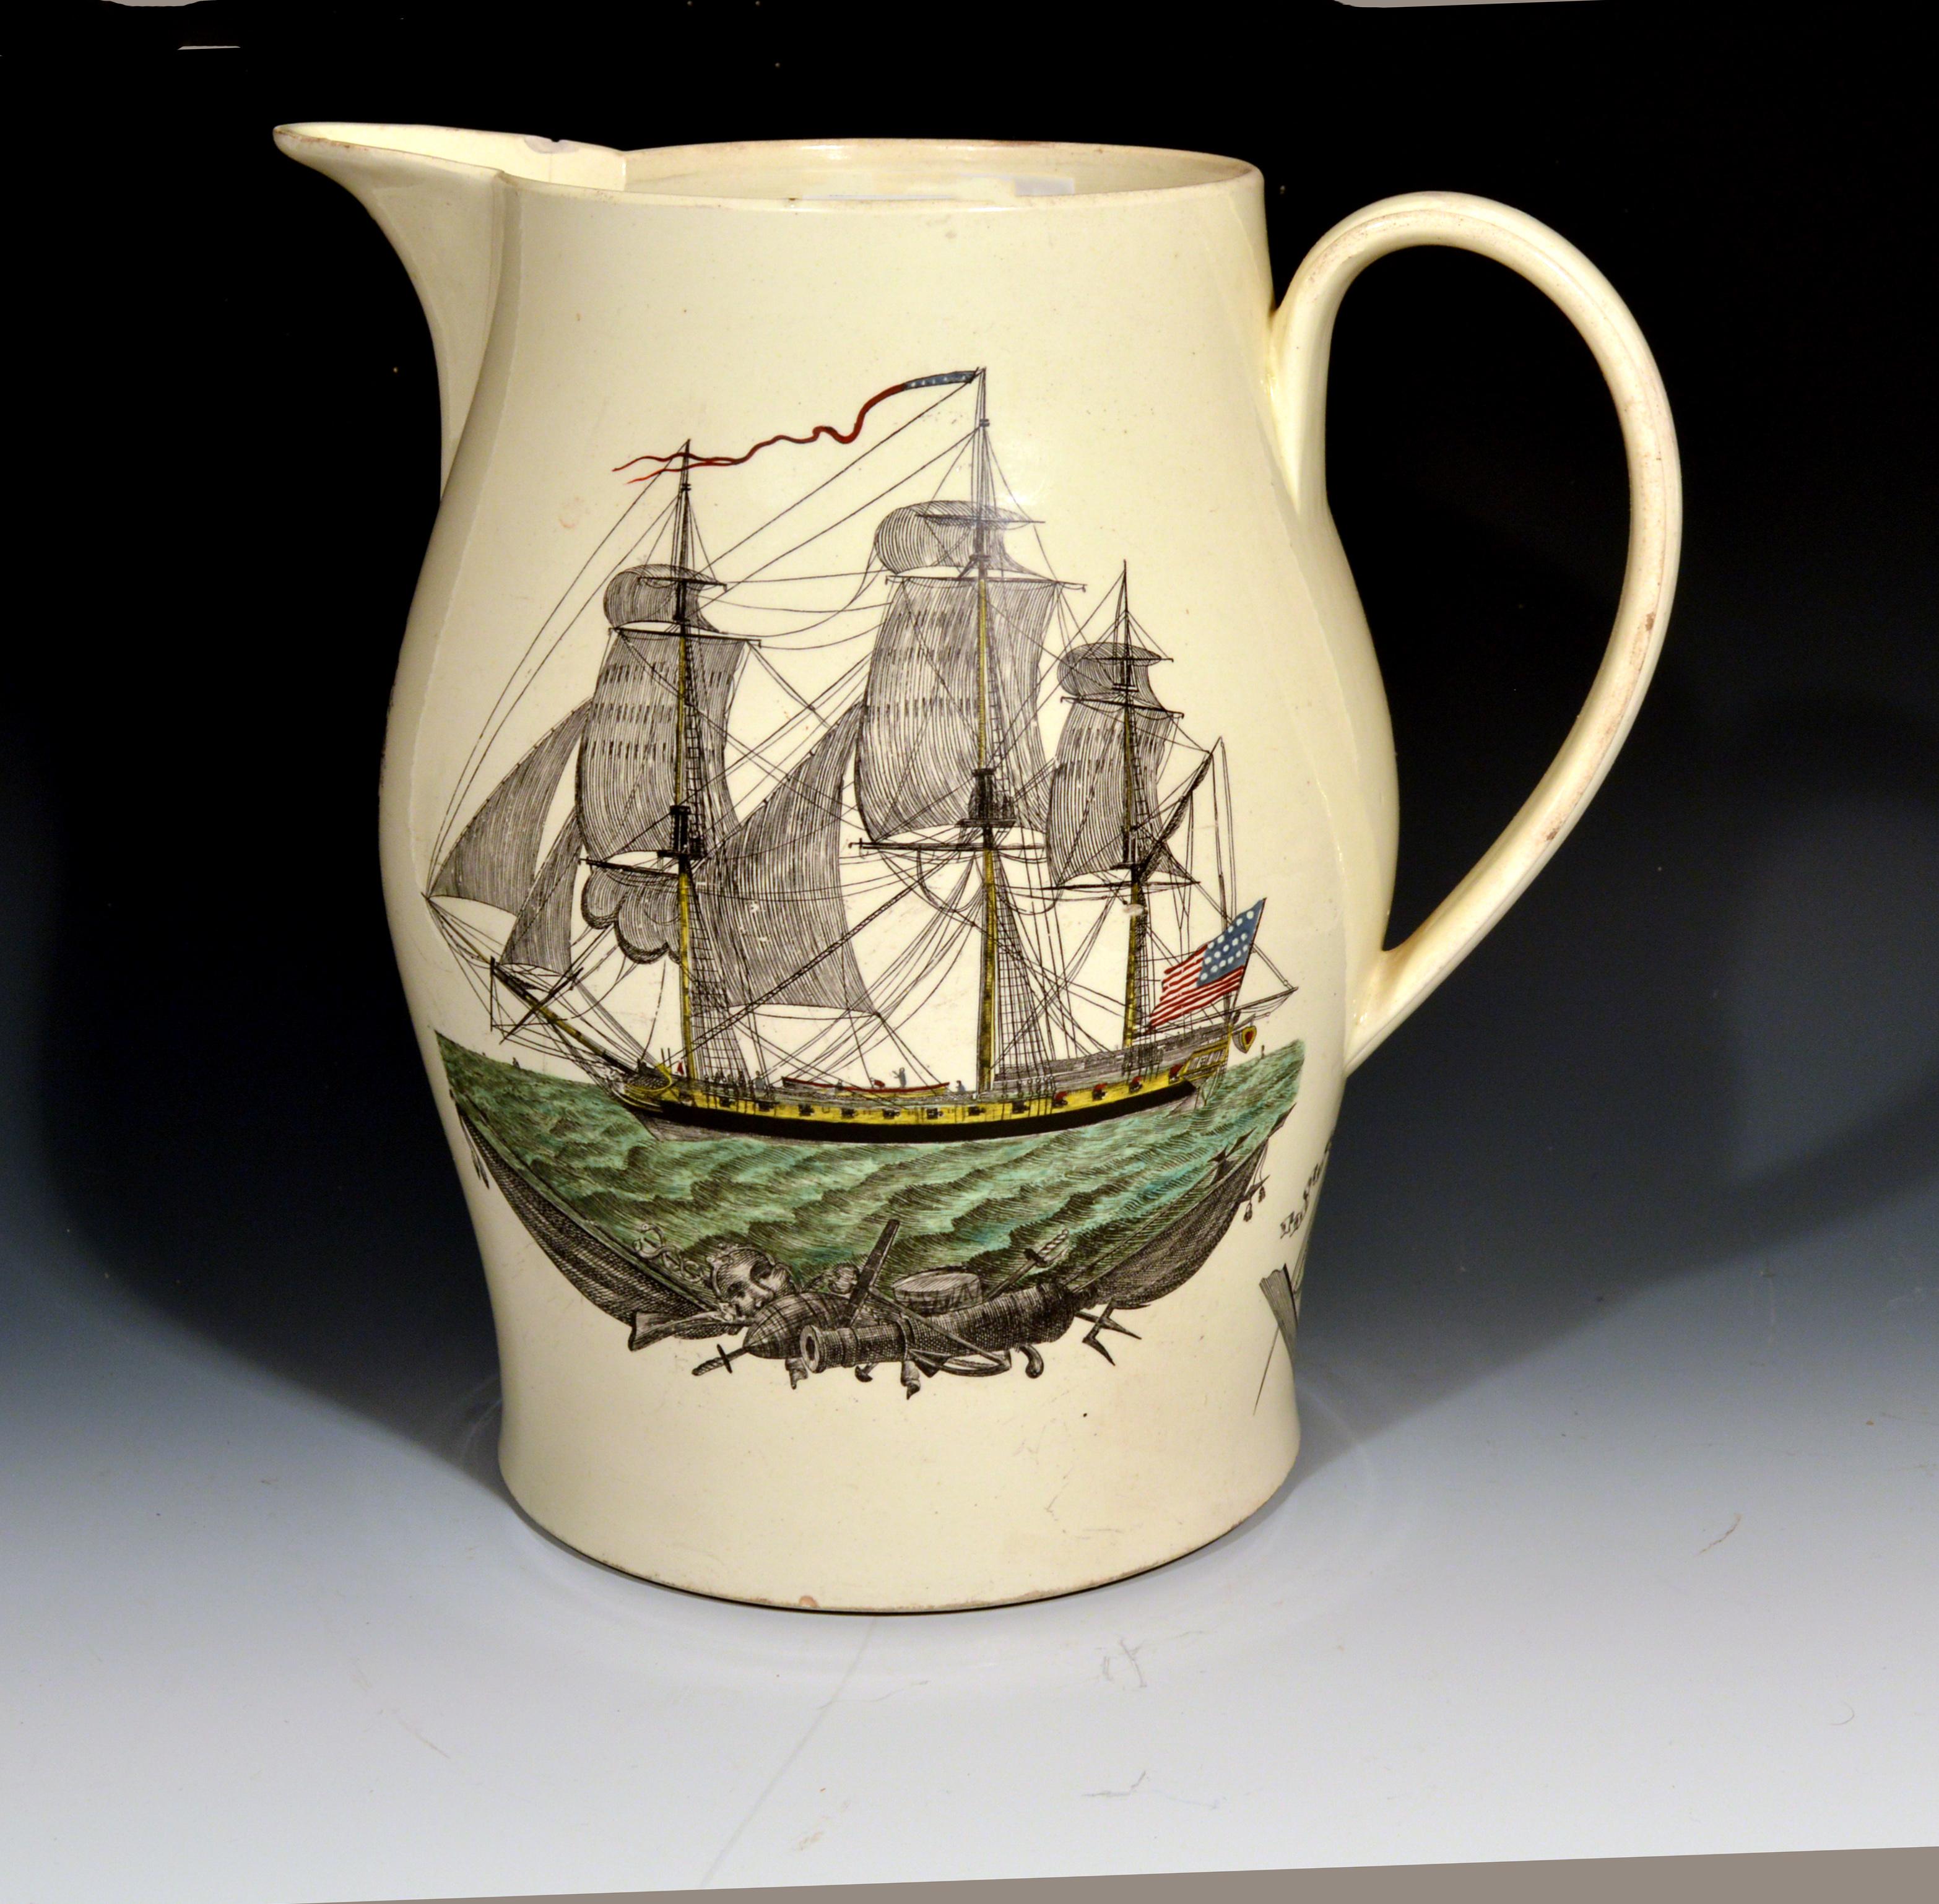 Liverpool Creamware American Ship Jug, Possibly Herculaneum Pottery, Liverpool, Circa 1799-1800

The large creamware jug decorated on one side with a colored printed American ship on a green sea with nautical objects in black below- a cannon,